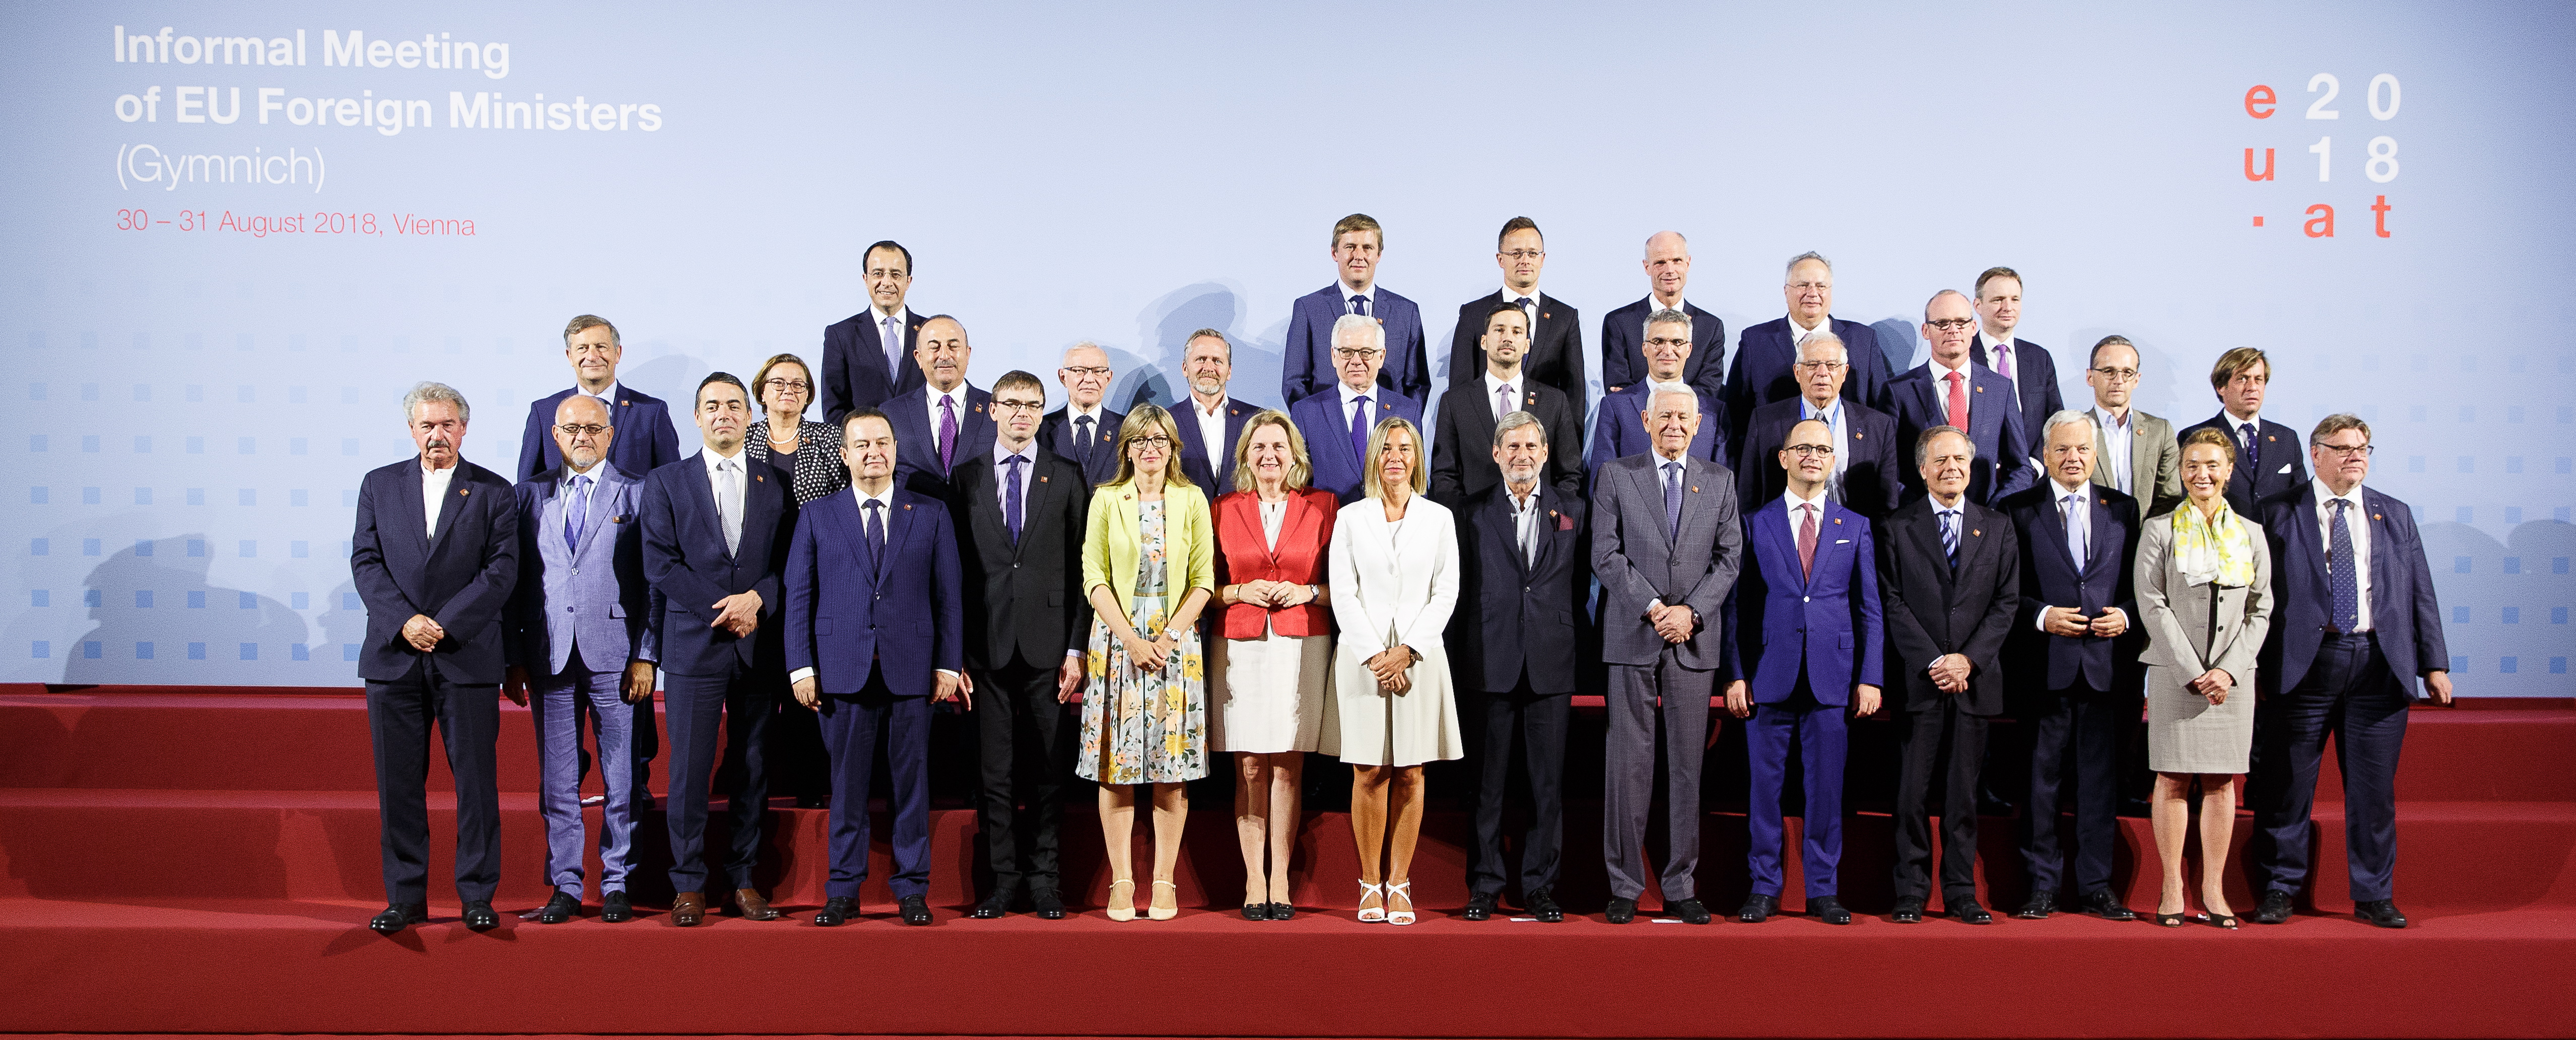 epa06986300 European and Candidate Countries foreign ministers pose for a group photo during the informal meeting of foreign affairs ministers at the Hofburg Palace in Vienna, Austria, 31 August 2018. Austria hosts a two-day informal meeting of foreign affairs ministers in Vienna on 30 and 31 August. Austria took over its third Presidency of the European Council from July 2018 until December 2018.  EPA/FLORIAN WIESER